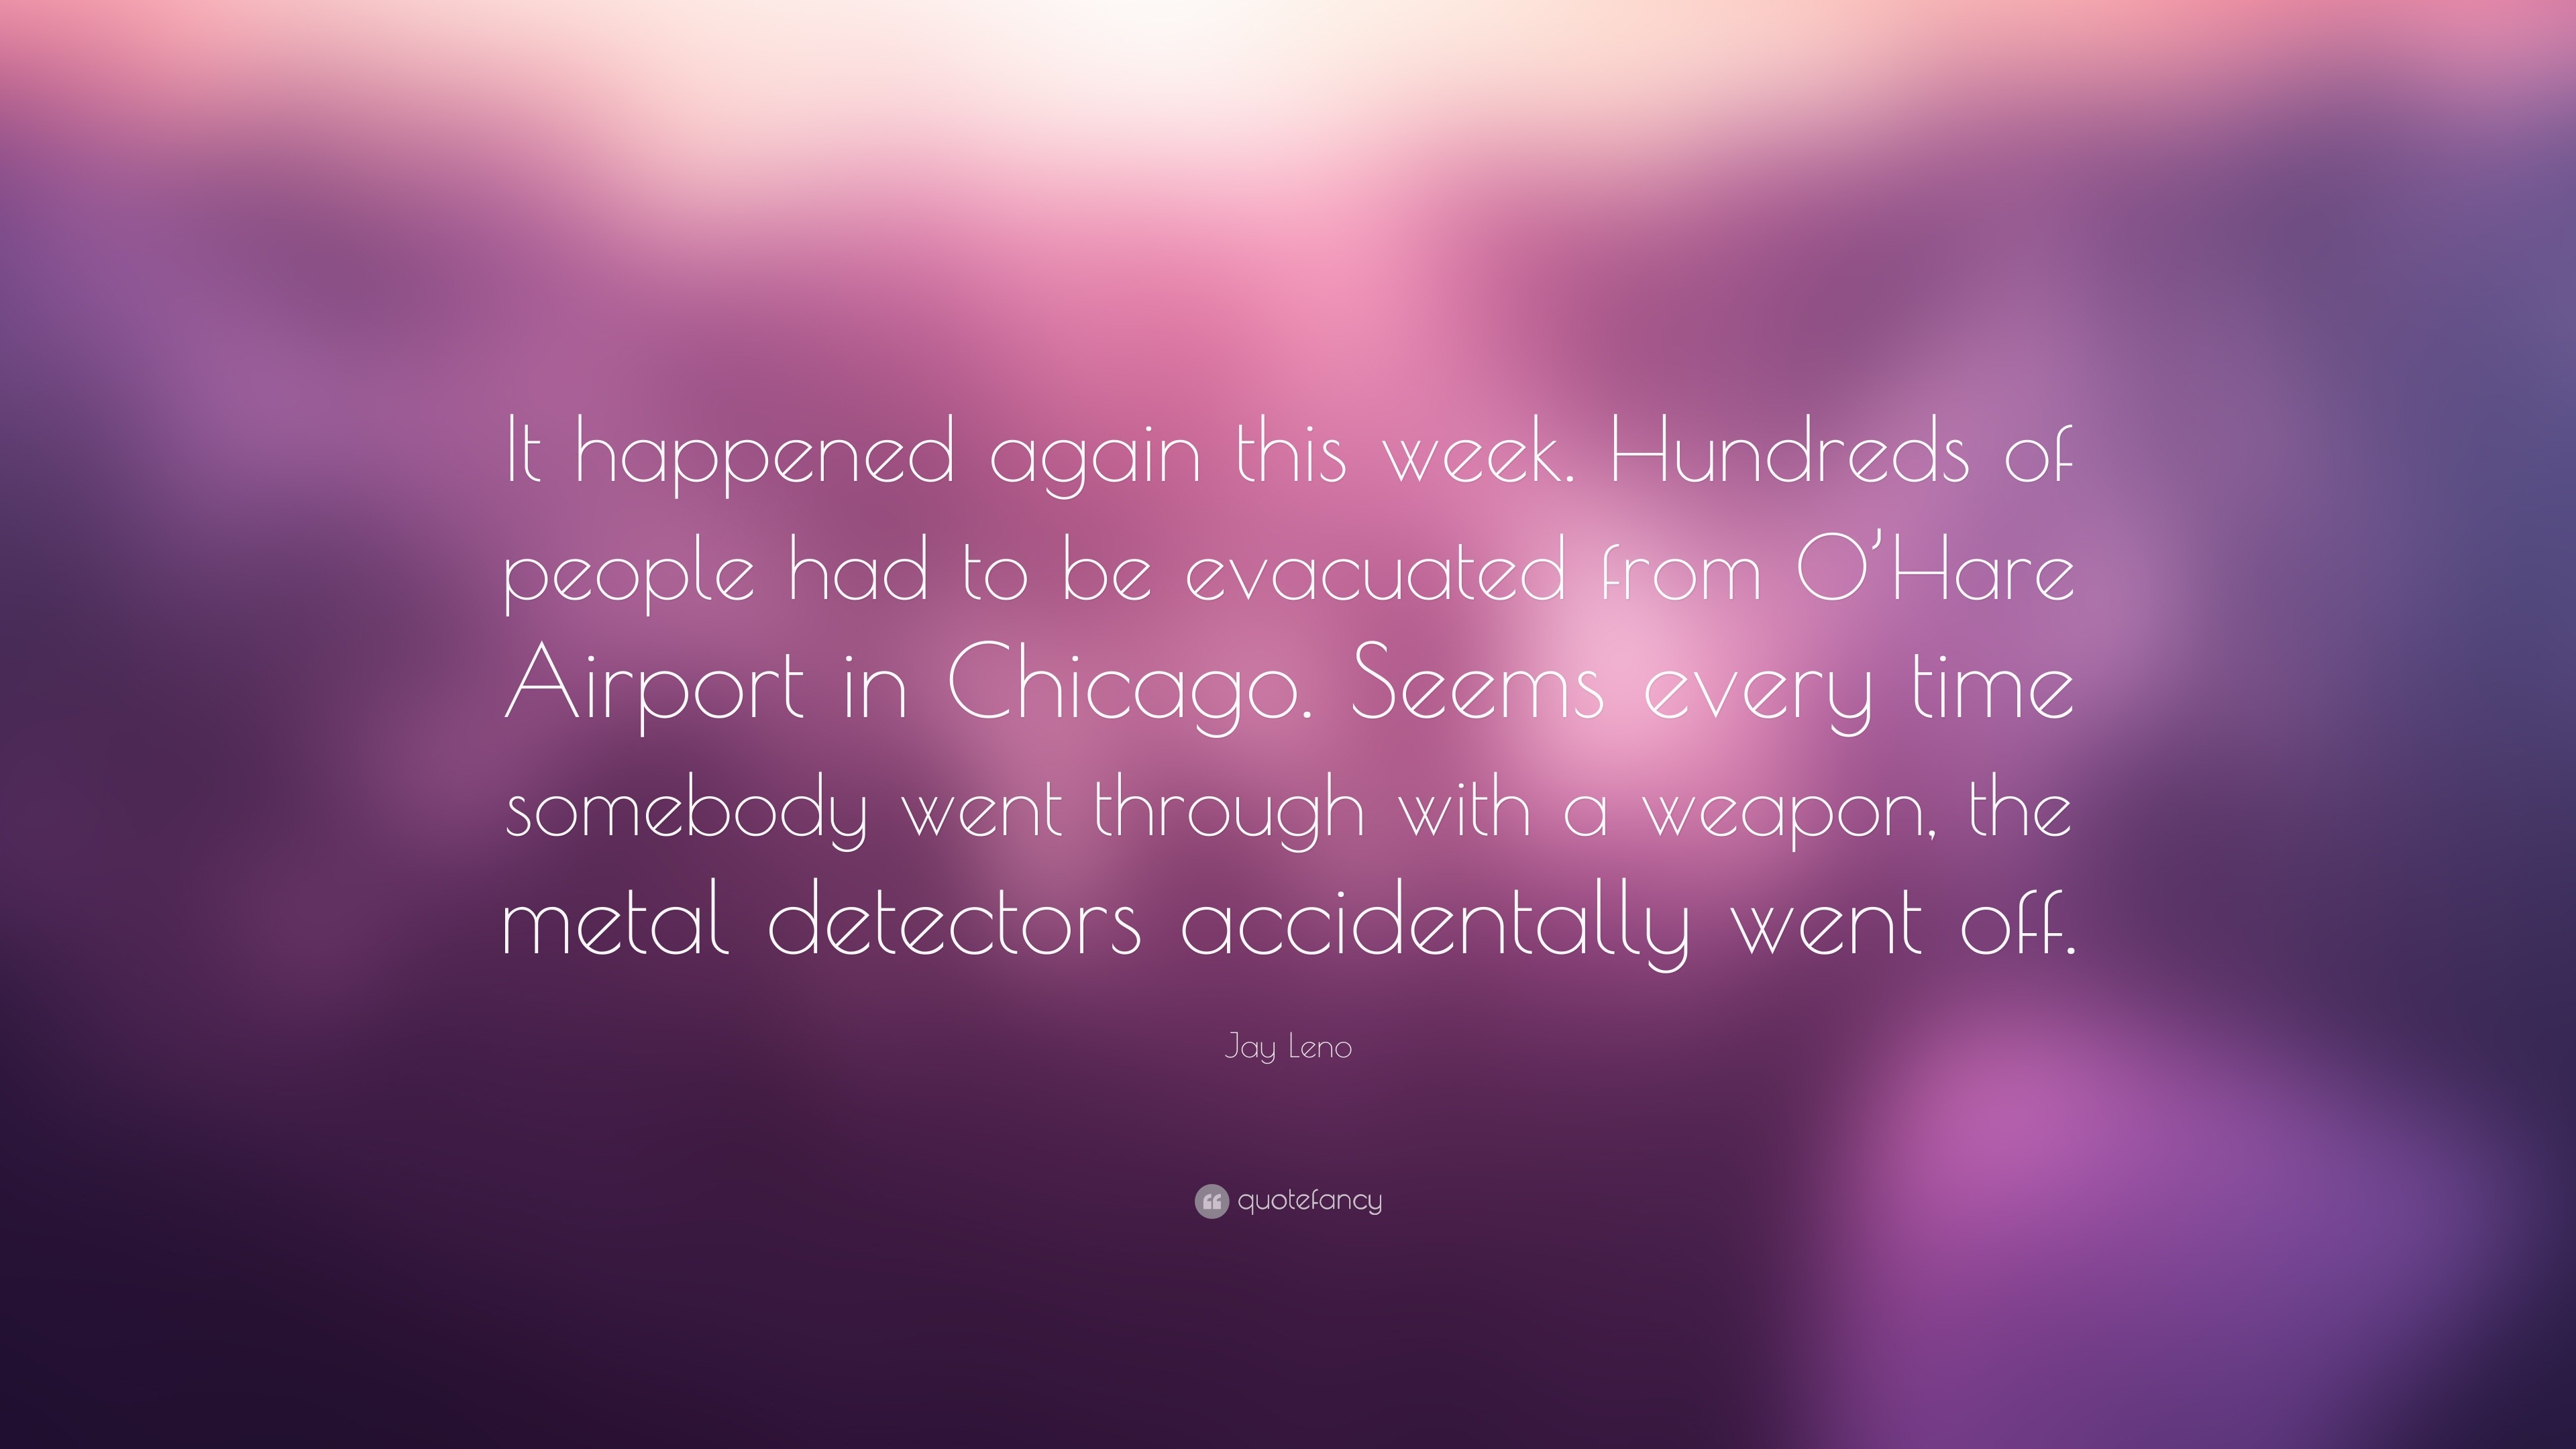 Jay Leno Quote “it Happened Again This Week Hundreds Of People Had To Be Evacuated From O Hare